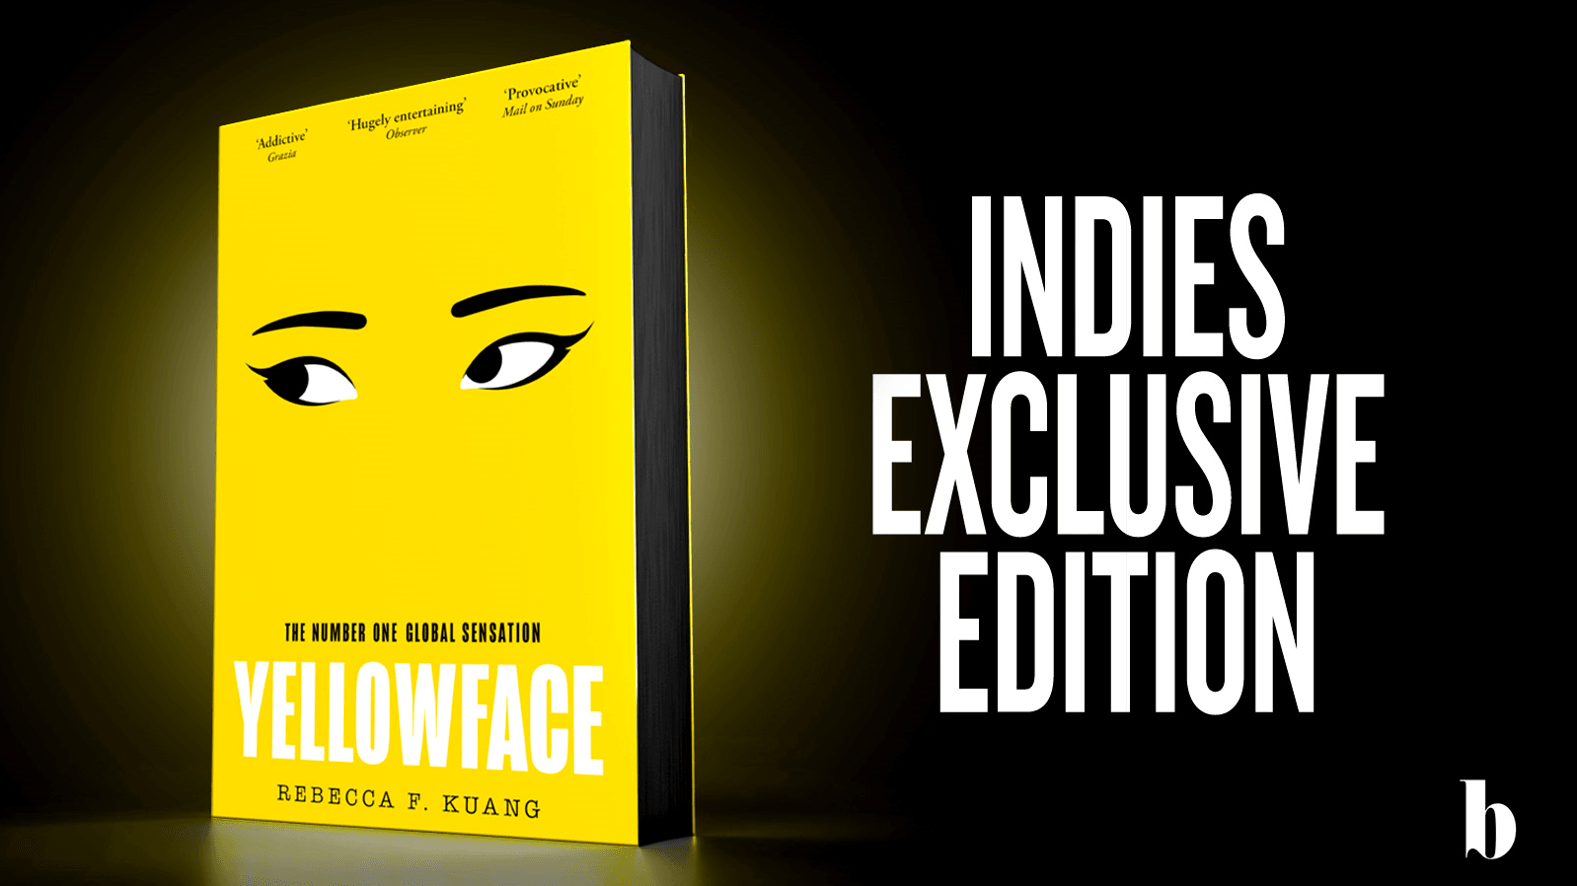 'Yellowface' by Rebecca F. Kuang - Indie Exclusive Edition - Pub. May 23rd - The Cleeve Bookshop